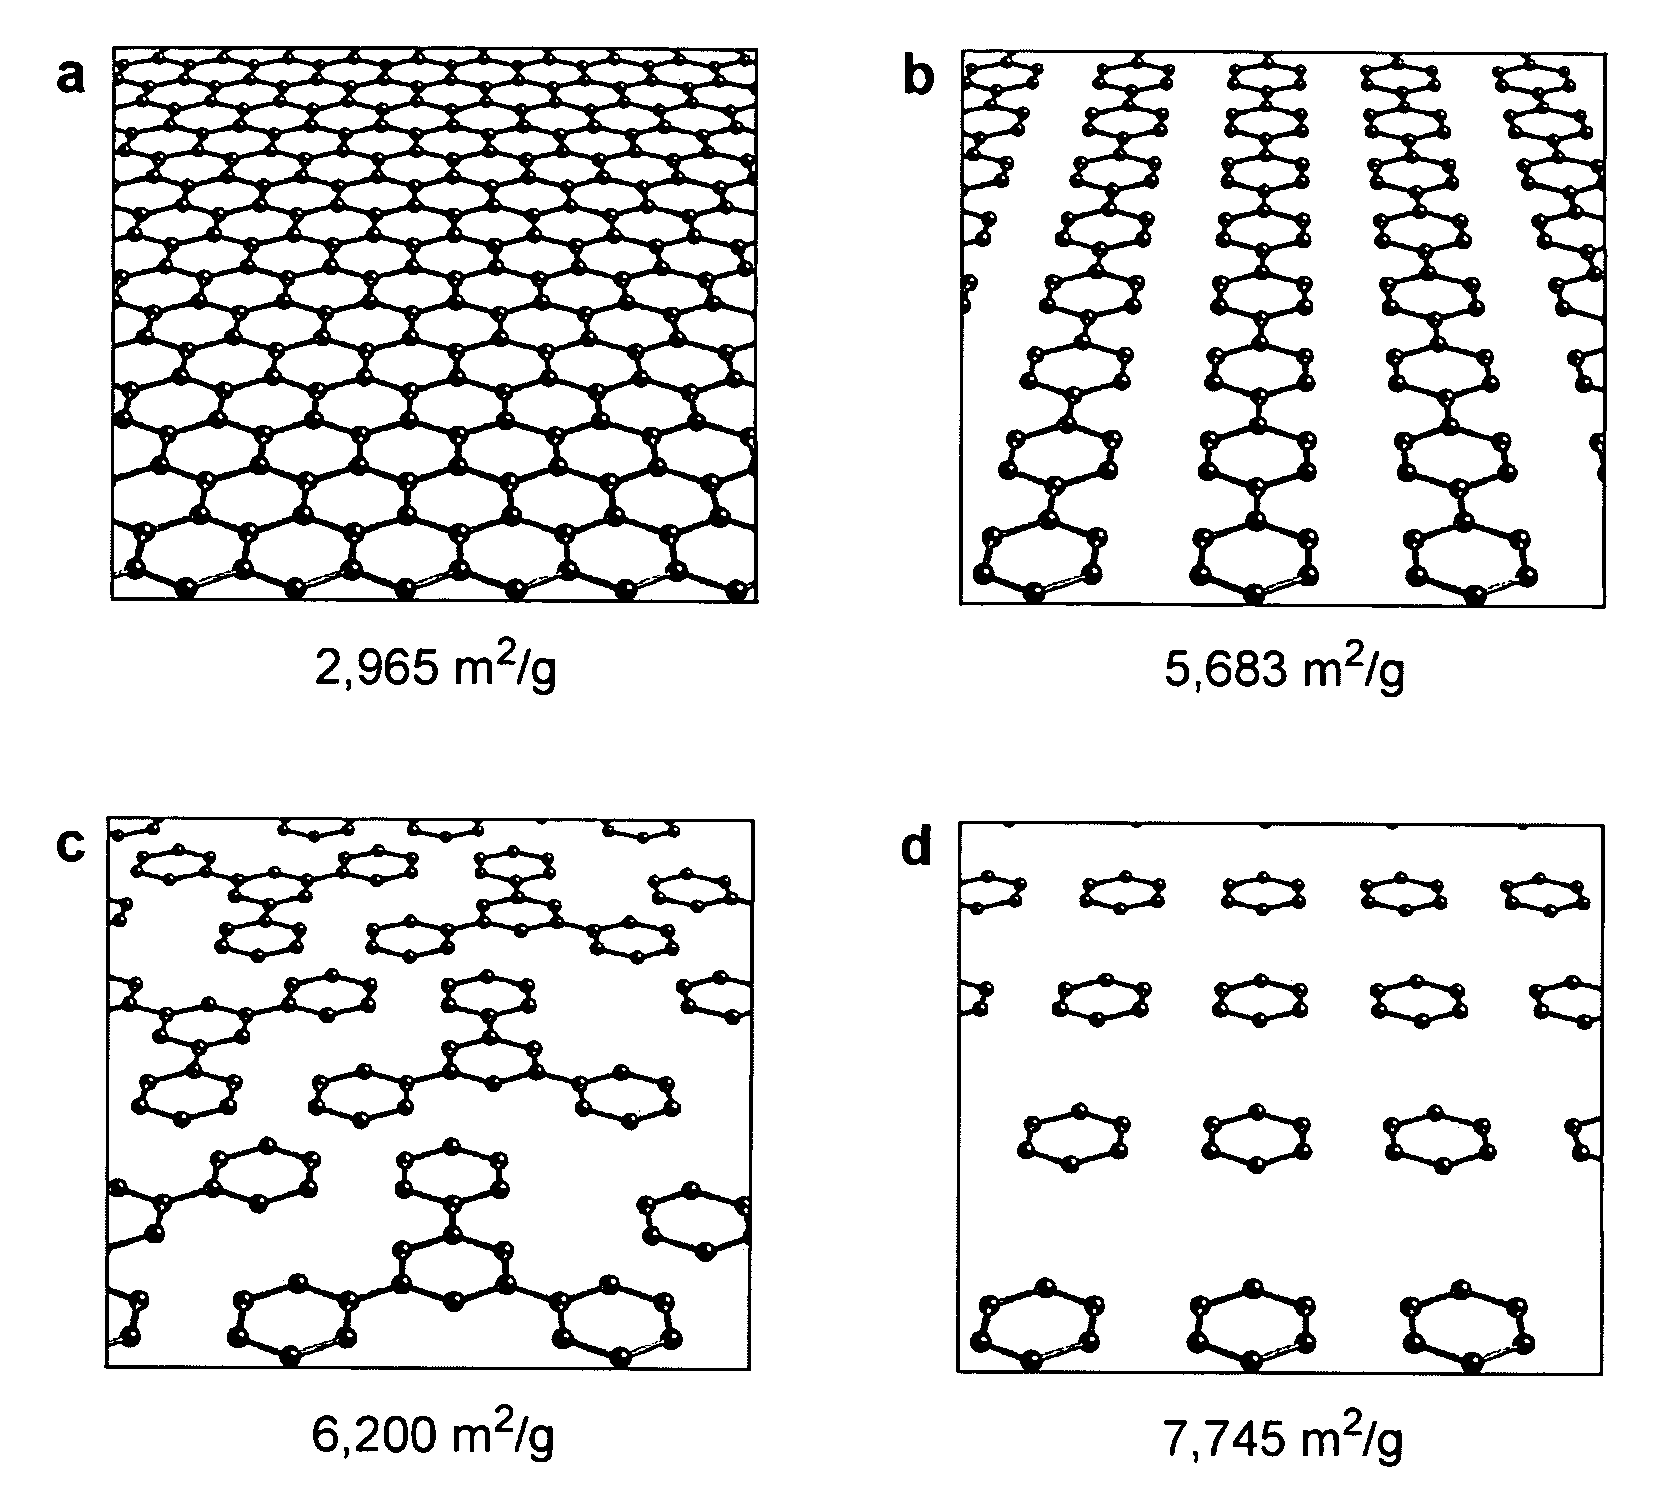 Implementation of a strategy for achieving extraordinary levels of surface area and porosity in crystals